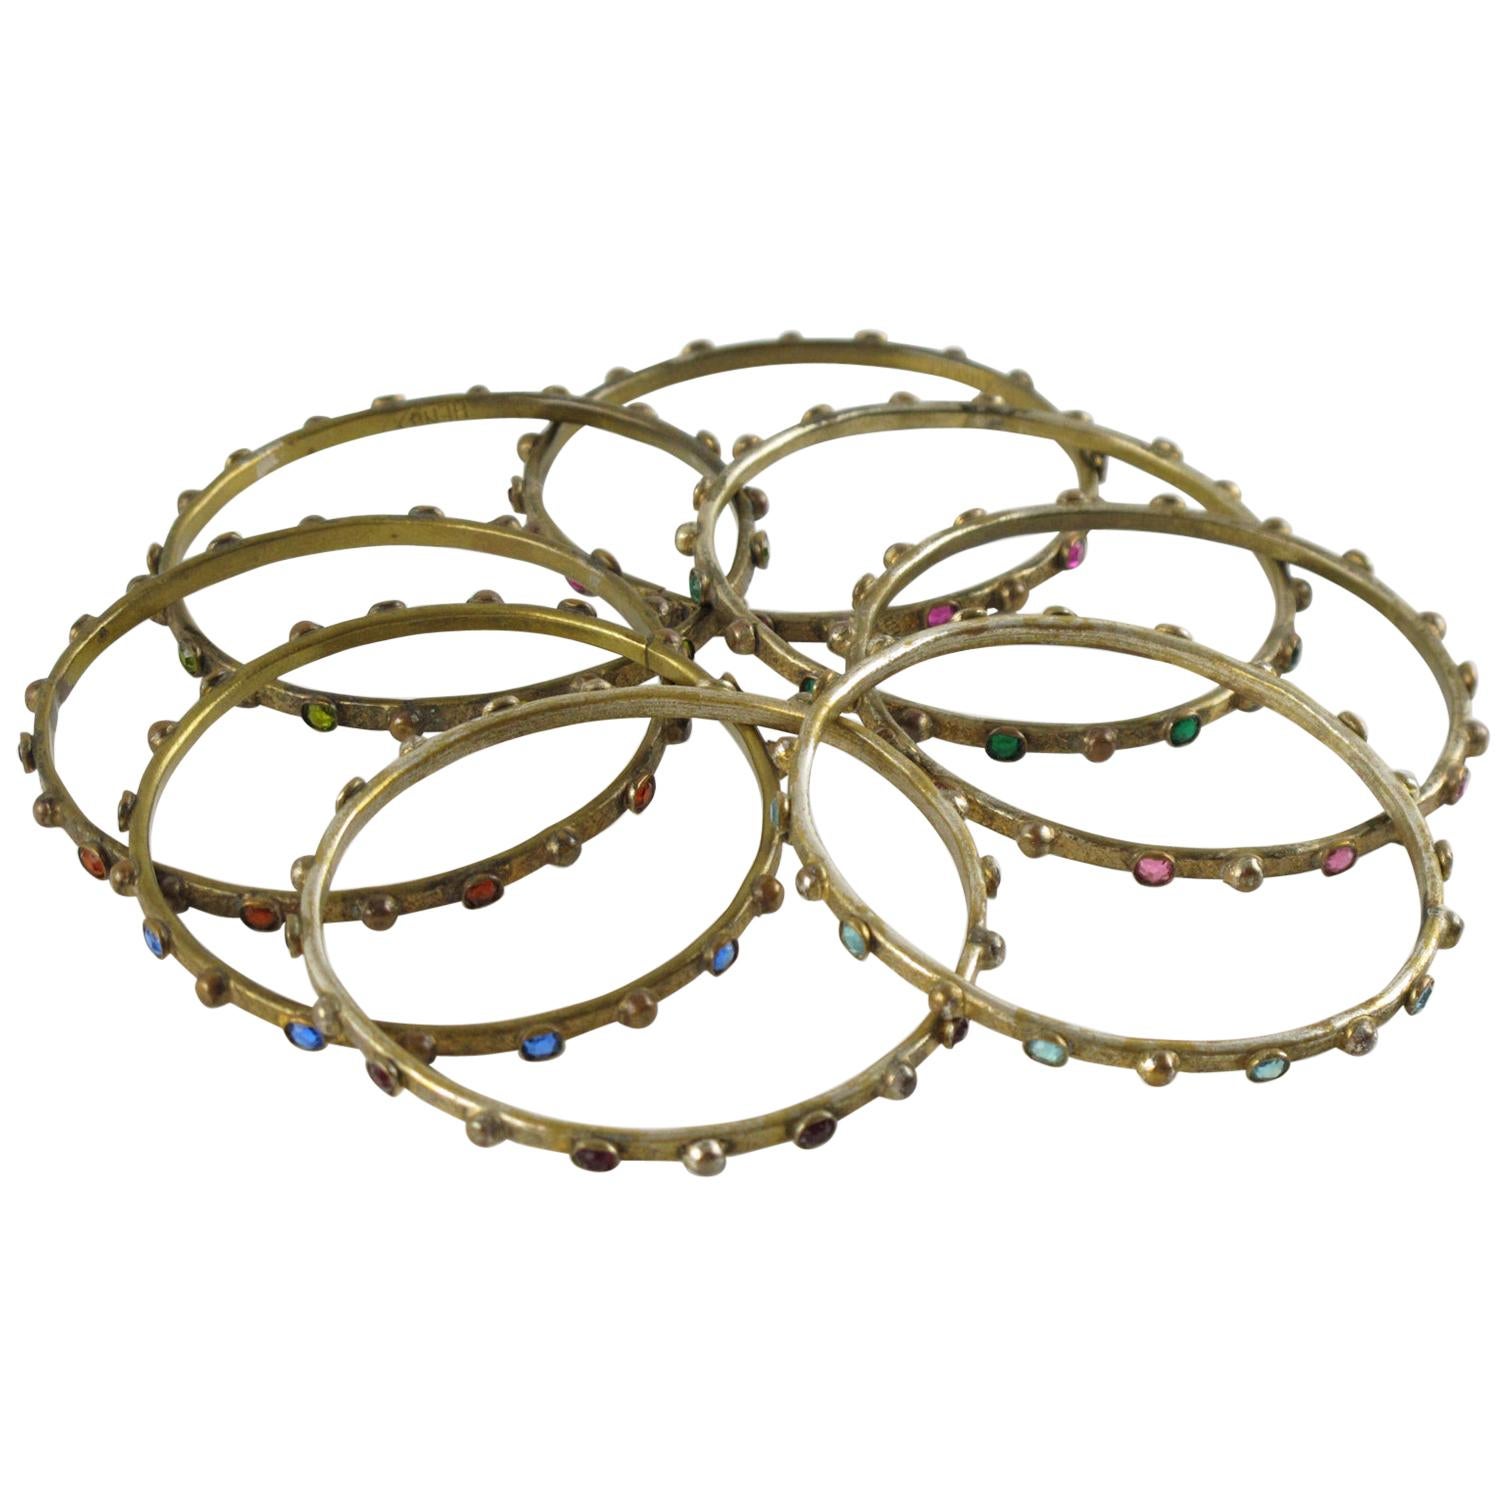 Gorgeous French Jewelry designer Henry Perichon (aka Henry), a set of eight gilded bronze spacers bracelet bangle. Features a Renaissance design inspiration ornate with crystal rhinestones in assorted tones of ruby red, turquoise, olive green,